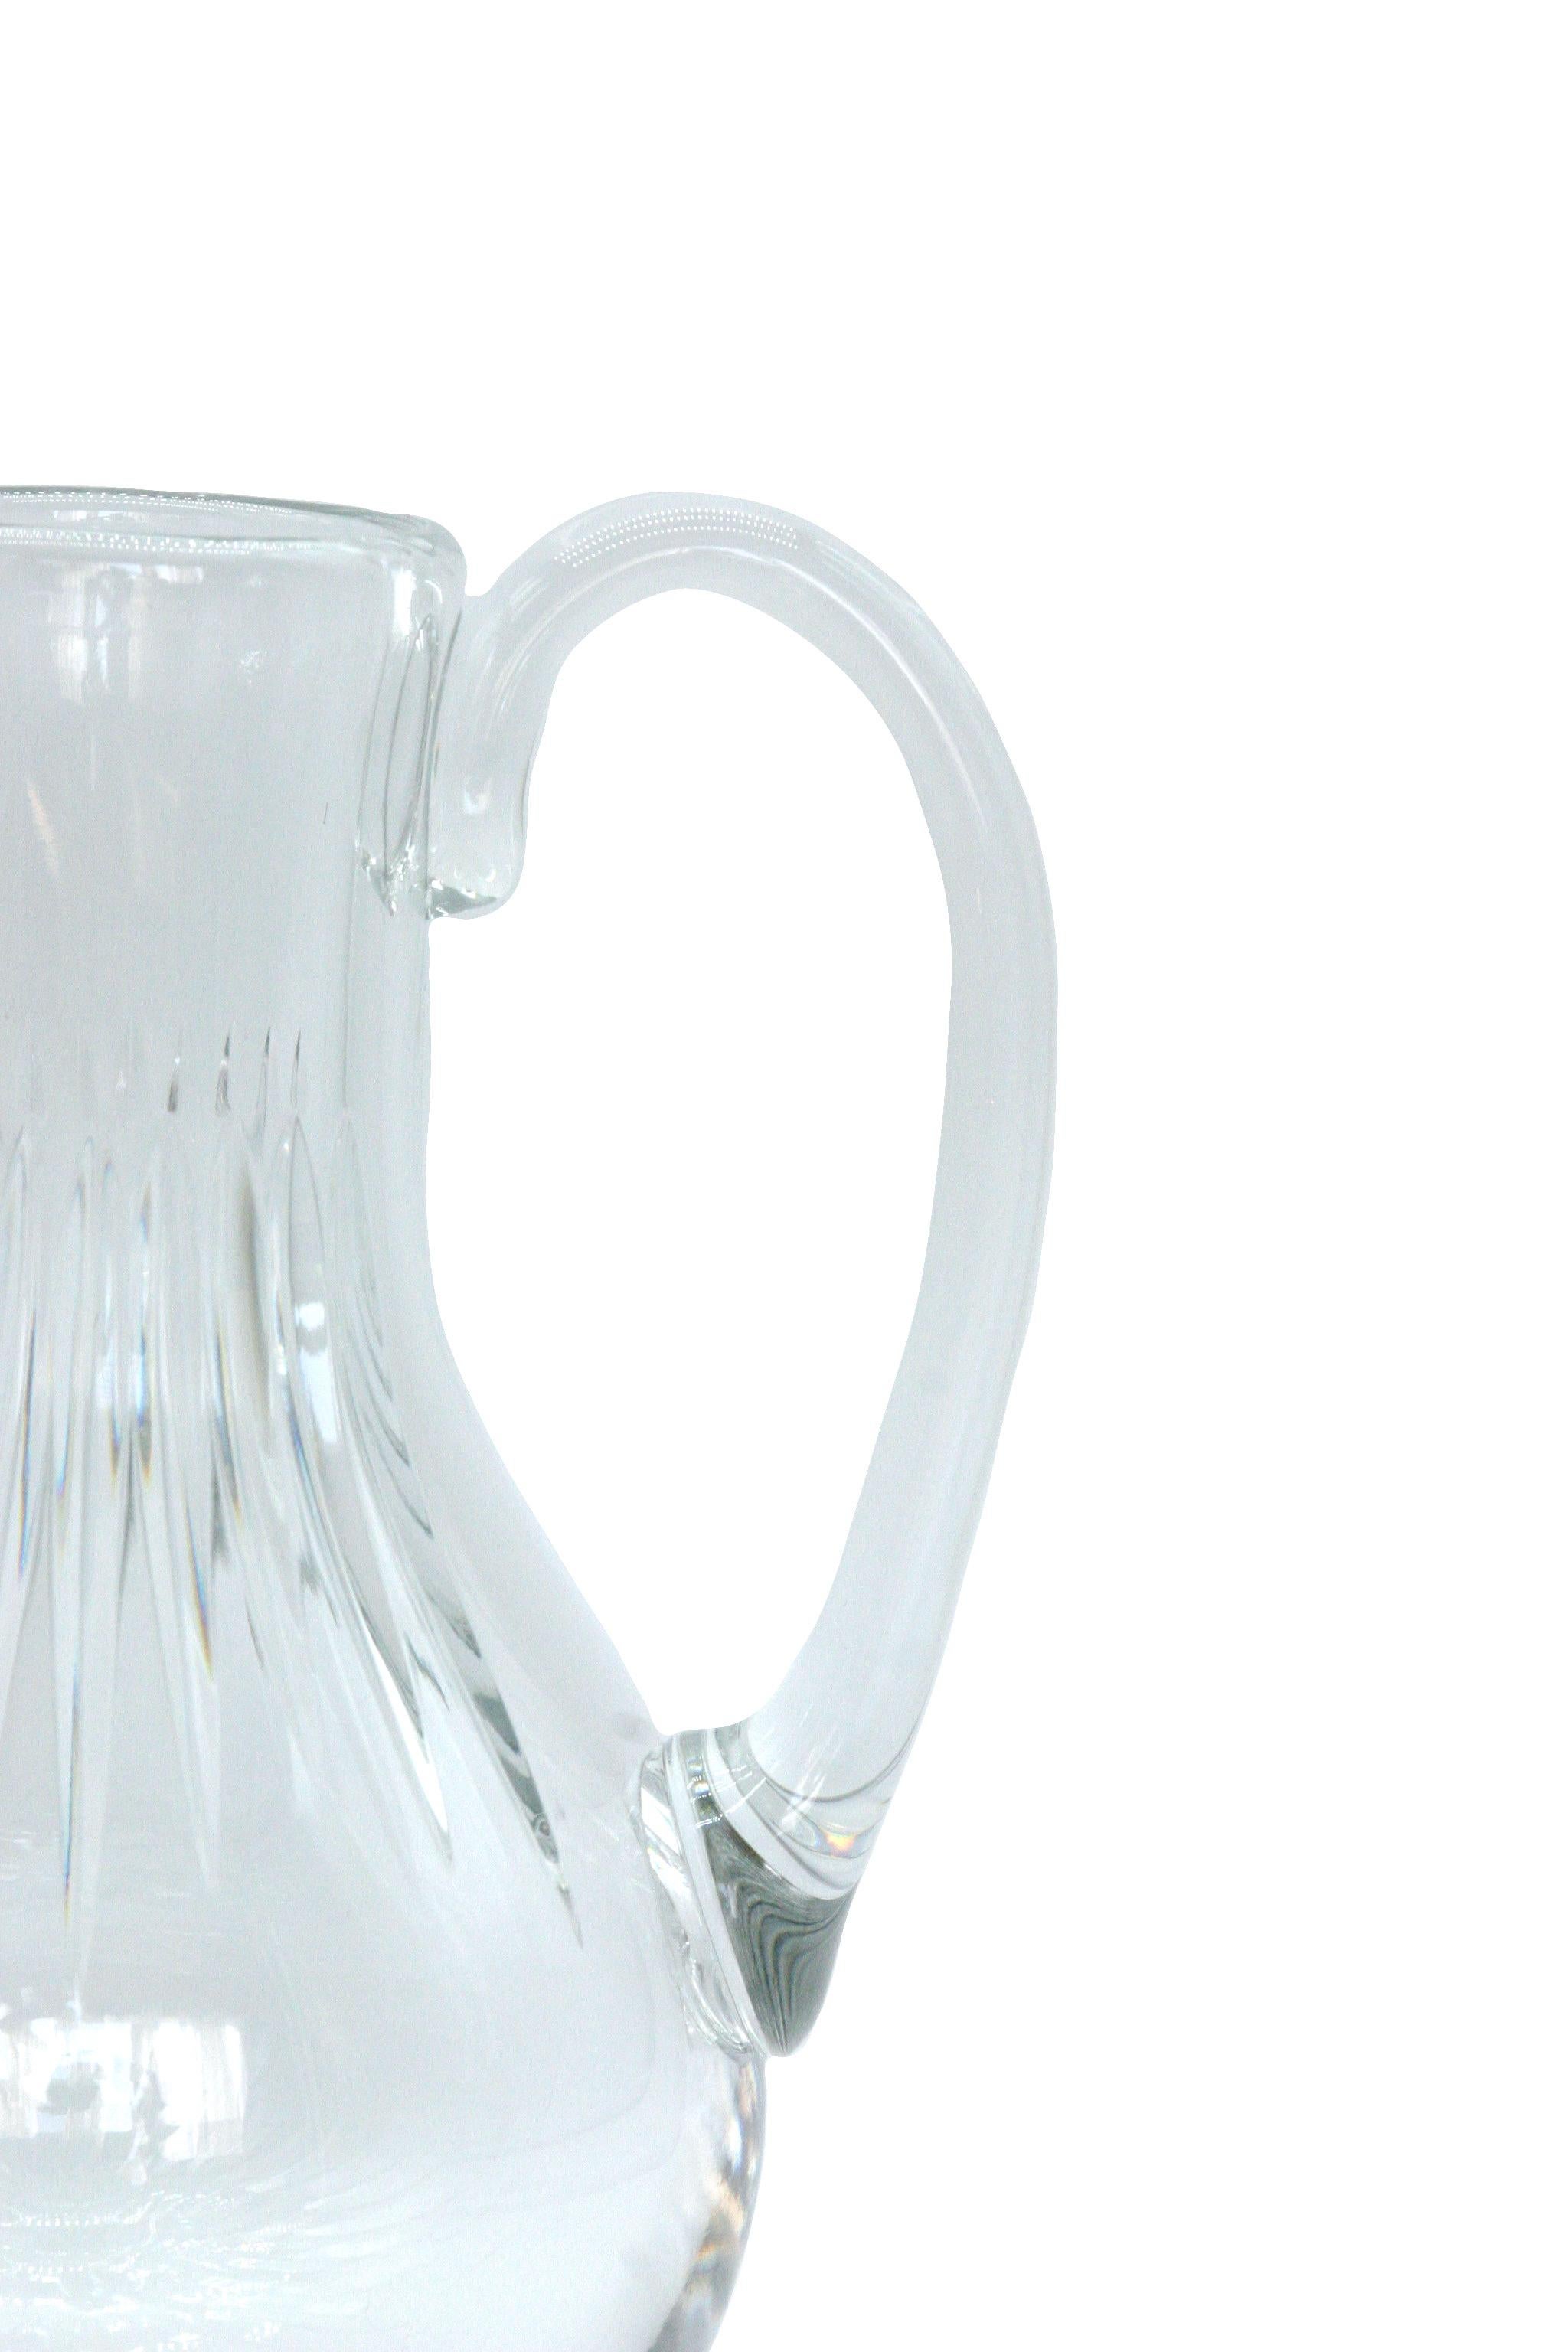 French Baccarat Crystal Barware / Tableware Pitcher For Sale